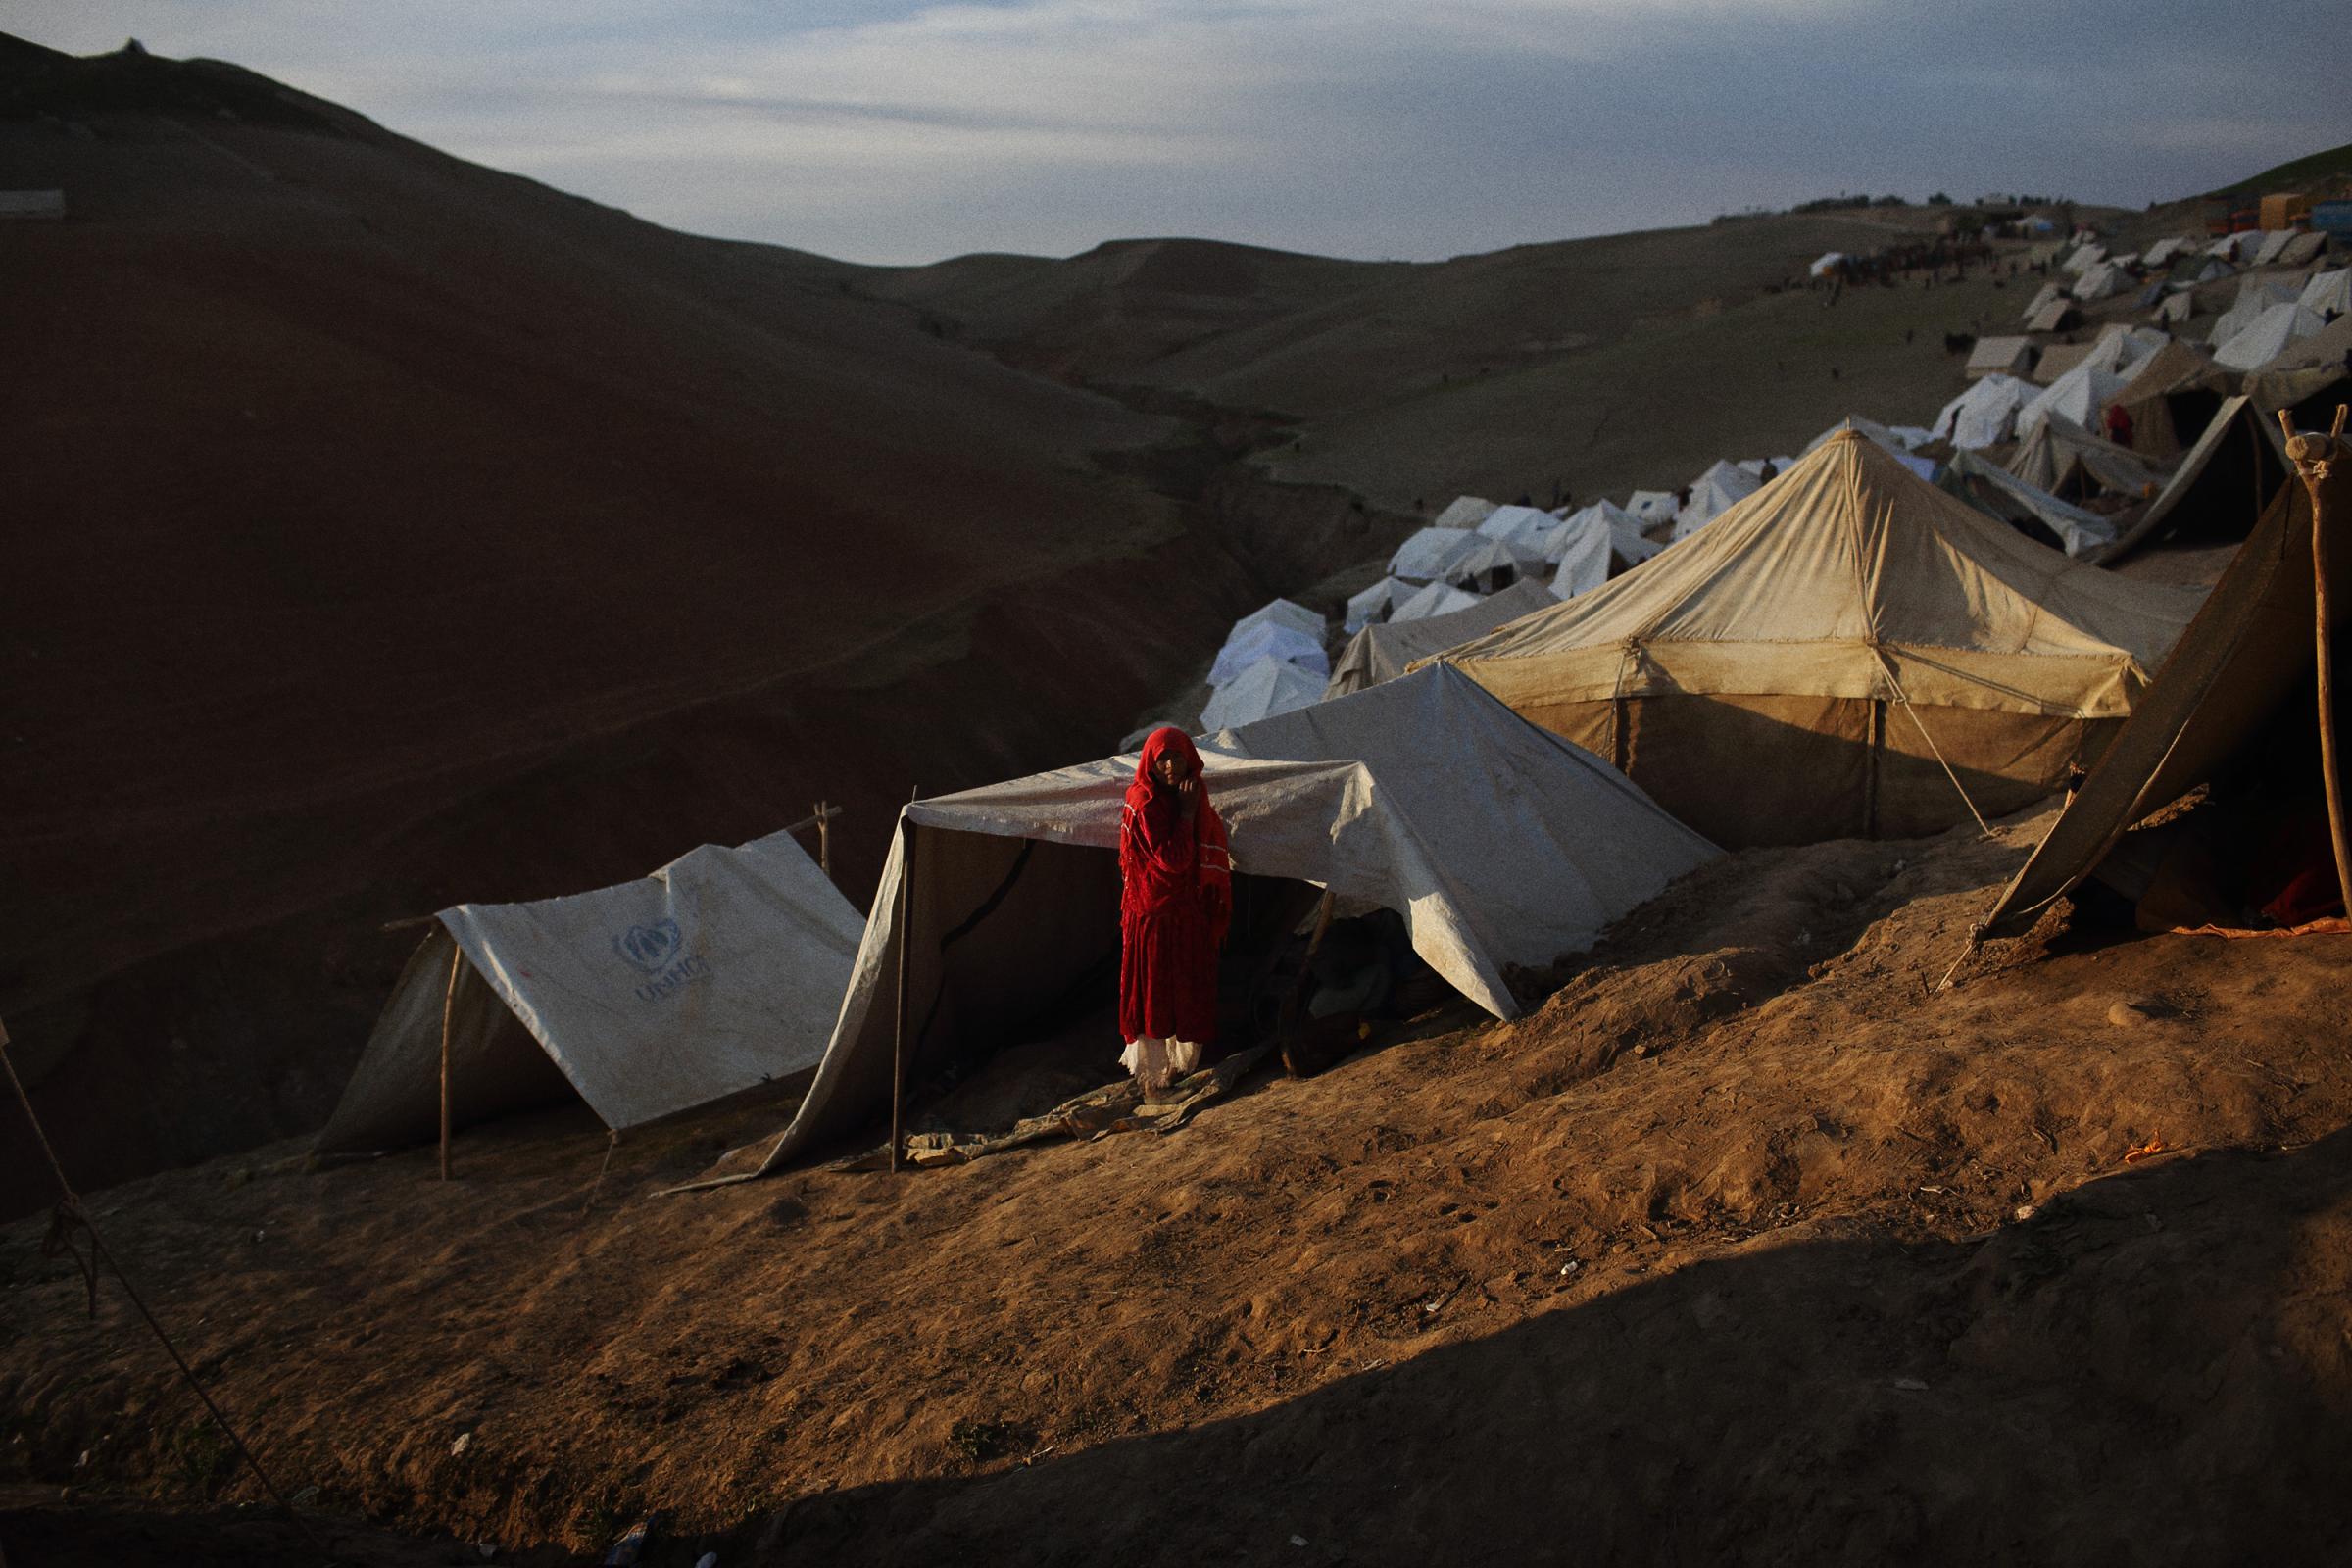 A woman by her tent on the side of a steep hill at the top of Abi Barik, May 6, 2014.